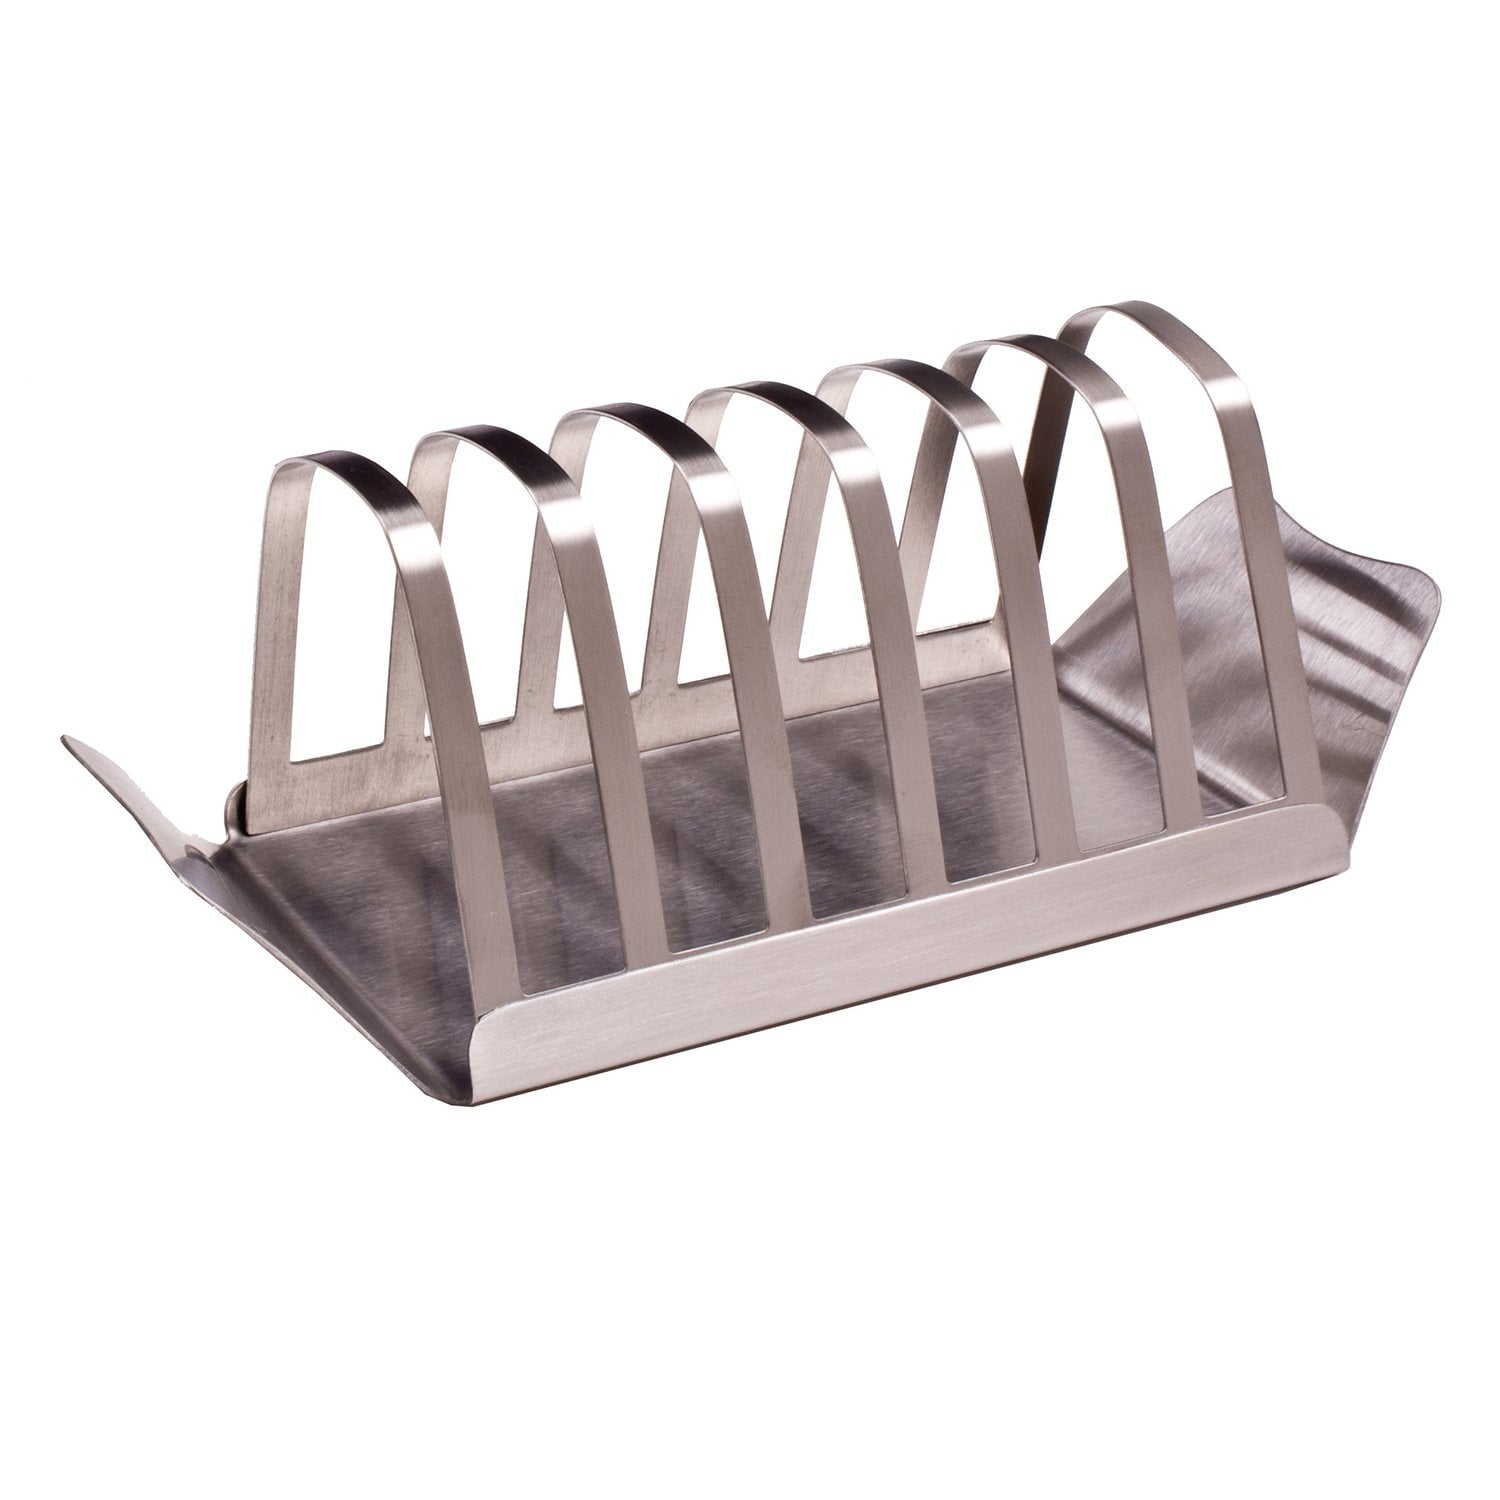 https://cdn.shopify.com/s/files/1/1416/1268/products/appetito-stainless-steel-toast-rack-28909068943554.jpg?v=1648101281&width=1500